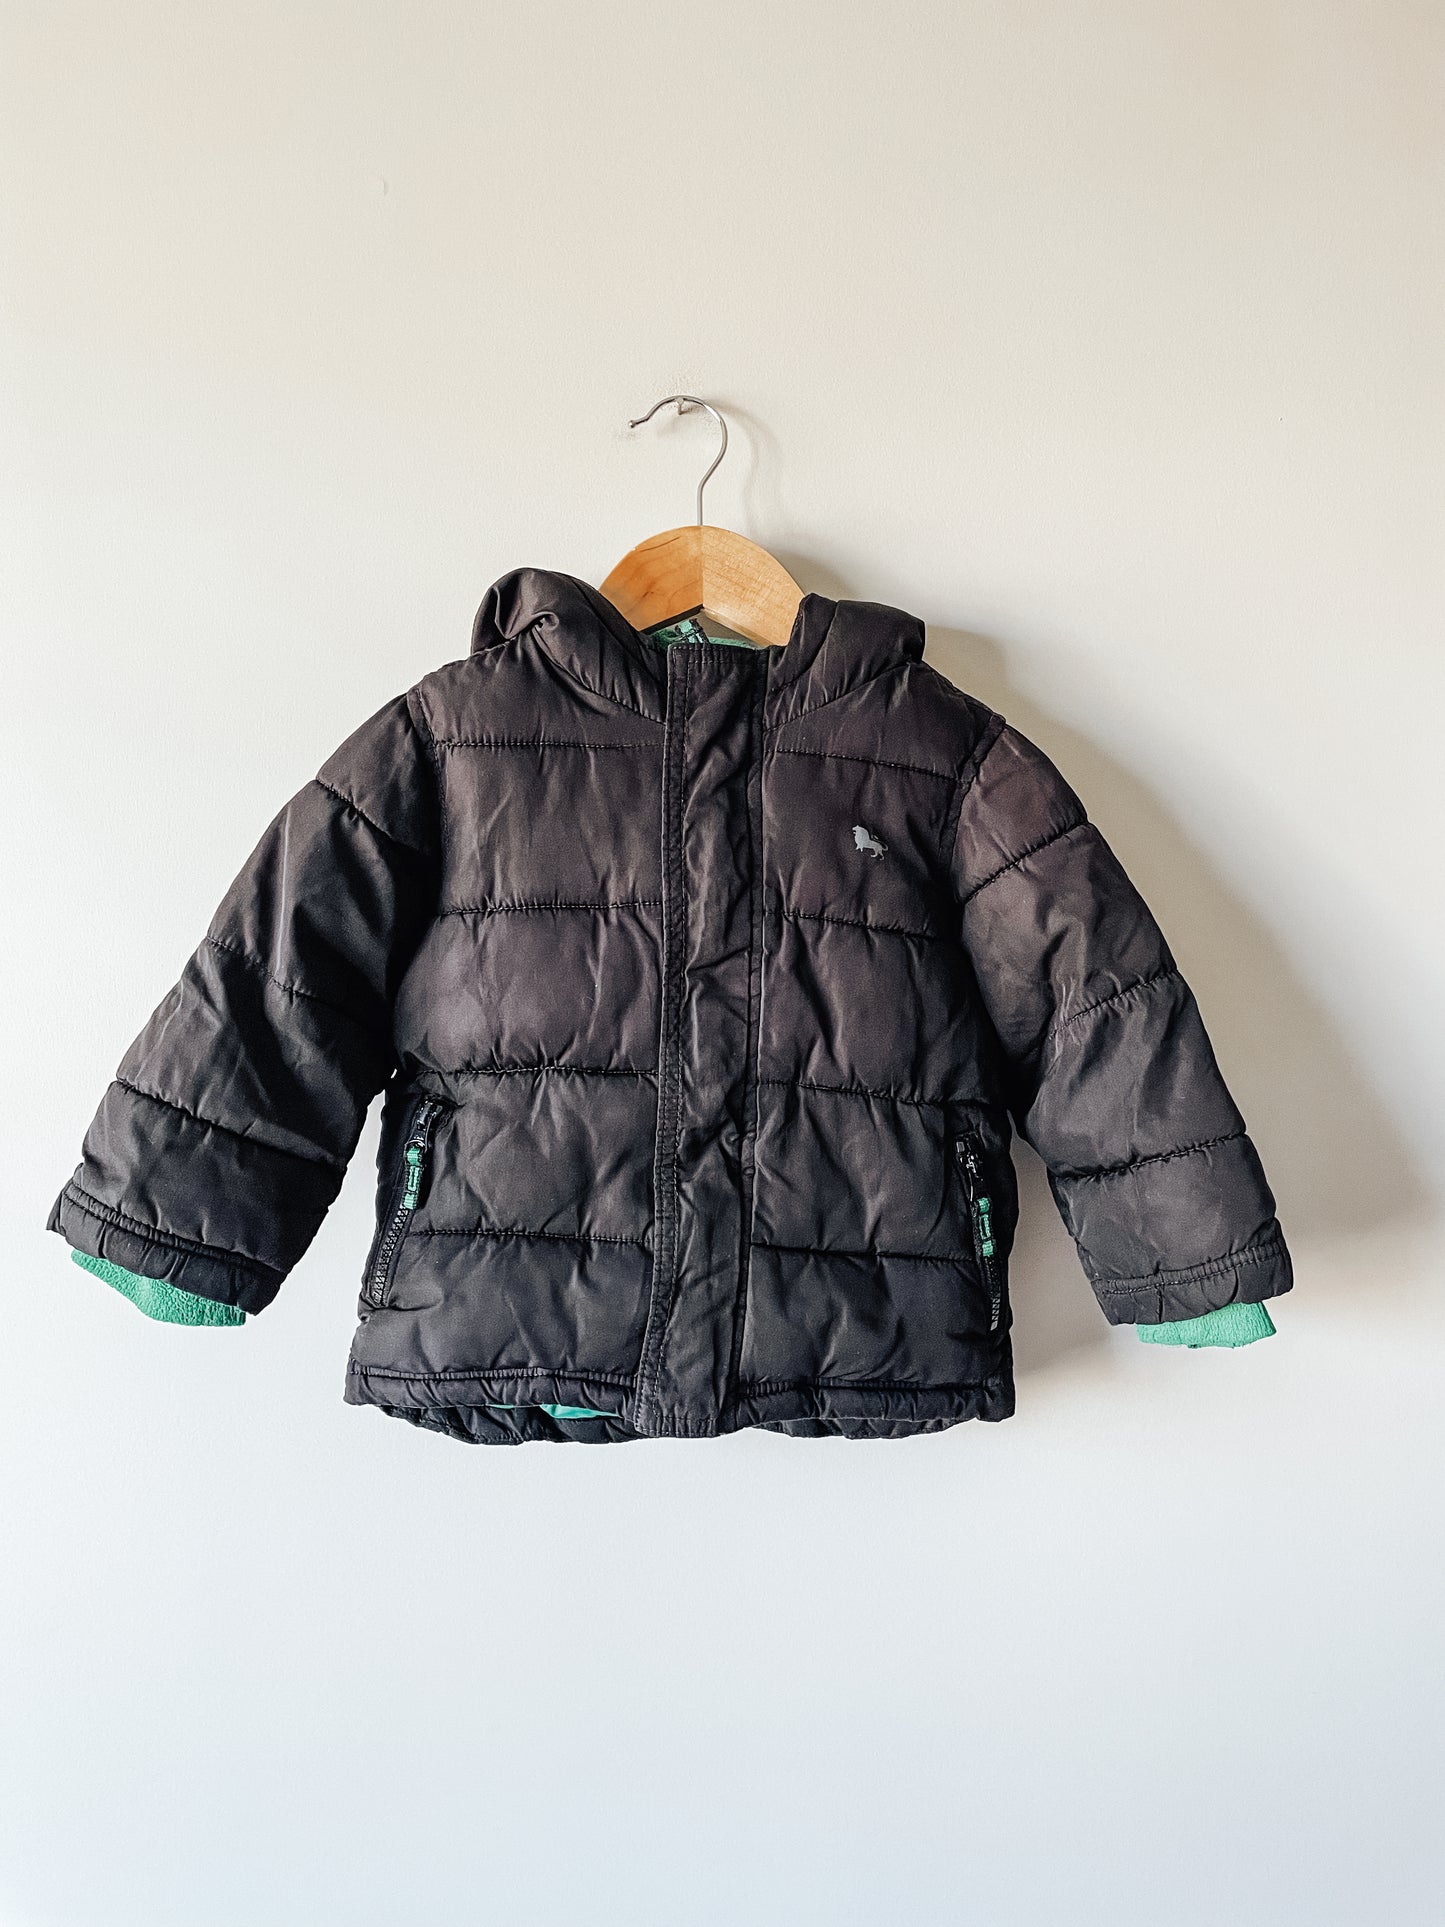 Old Navy Outerwear - 2T